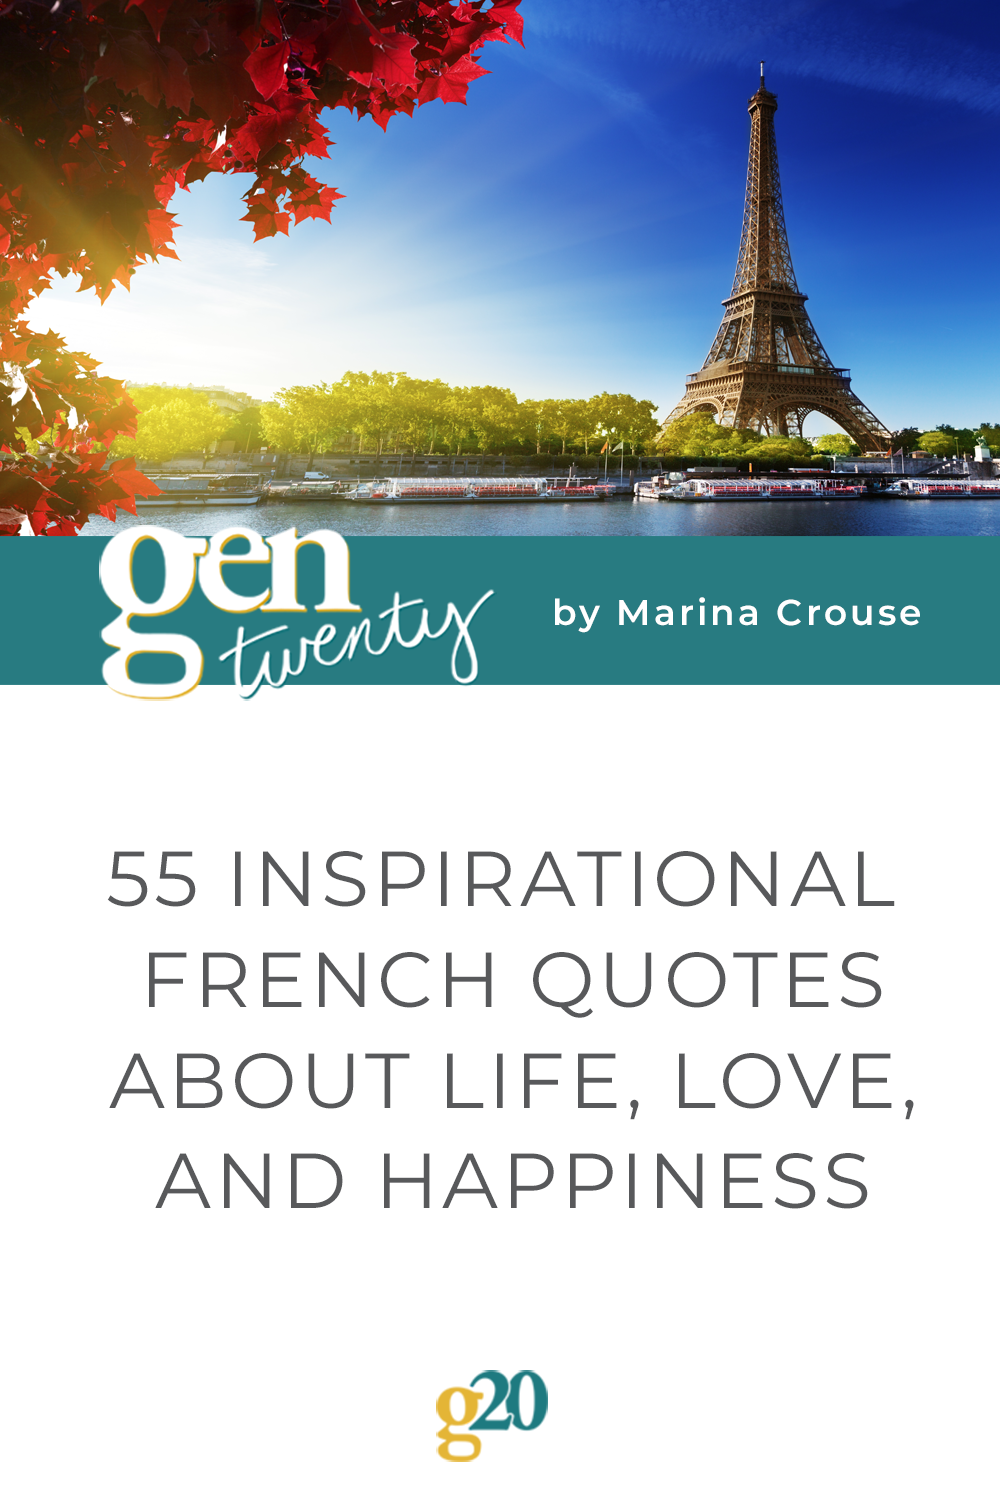 55 Inspirational French Quotes About Life, Love, and Happiness